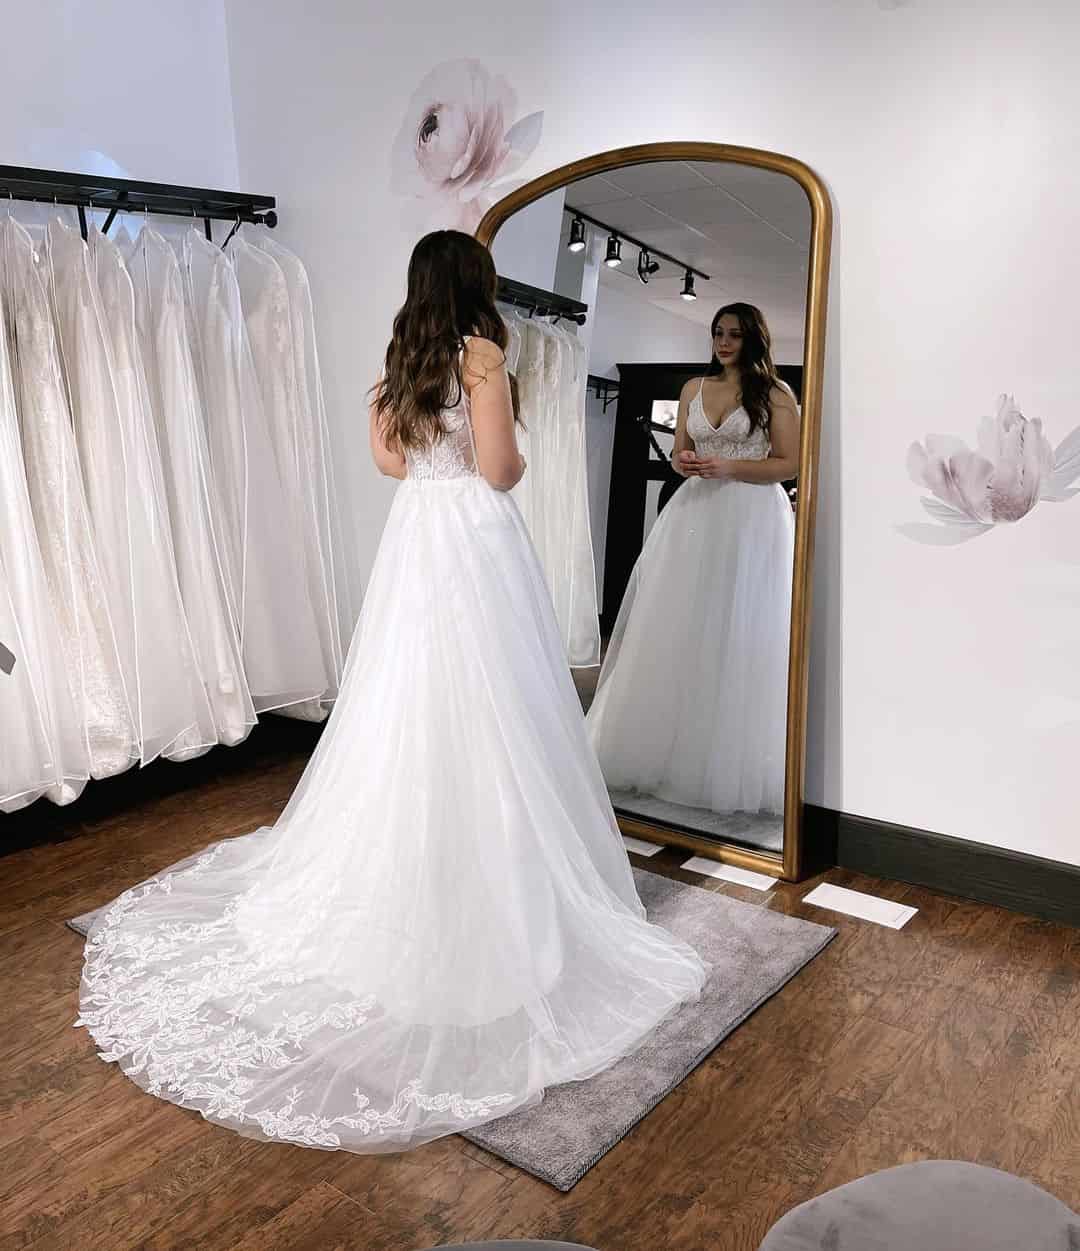 what undergarments to wear while wedding dress shopping